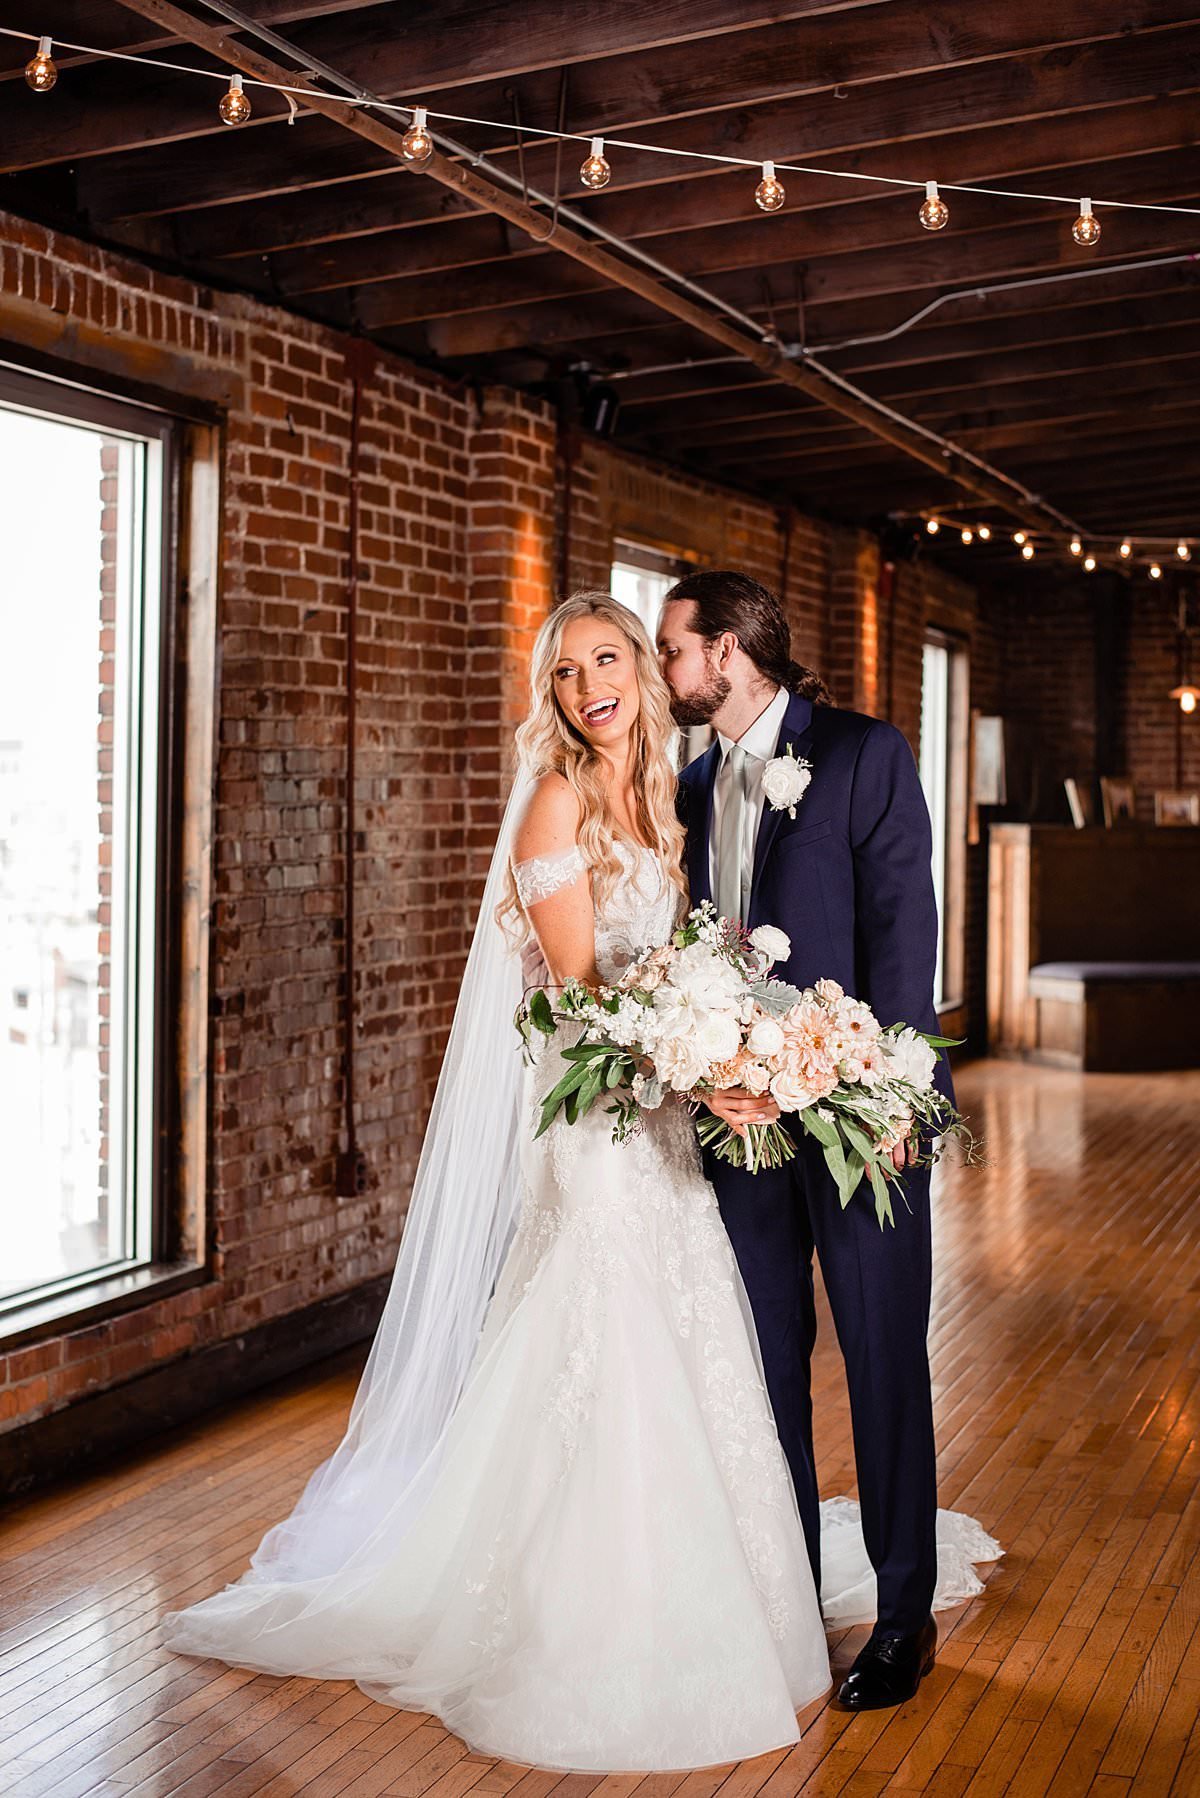 Groom whispering into his fiances ear while she smiles and laughs, they are in indoor urban venue setting